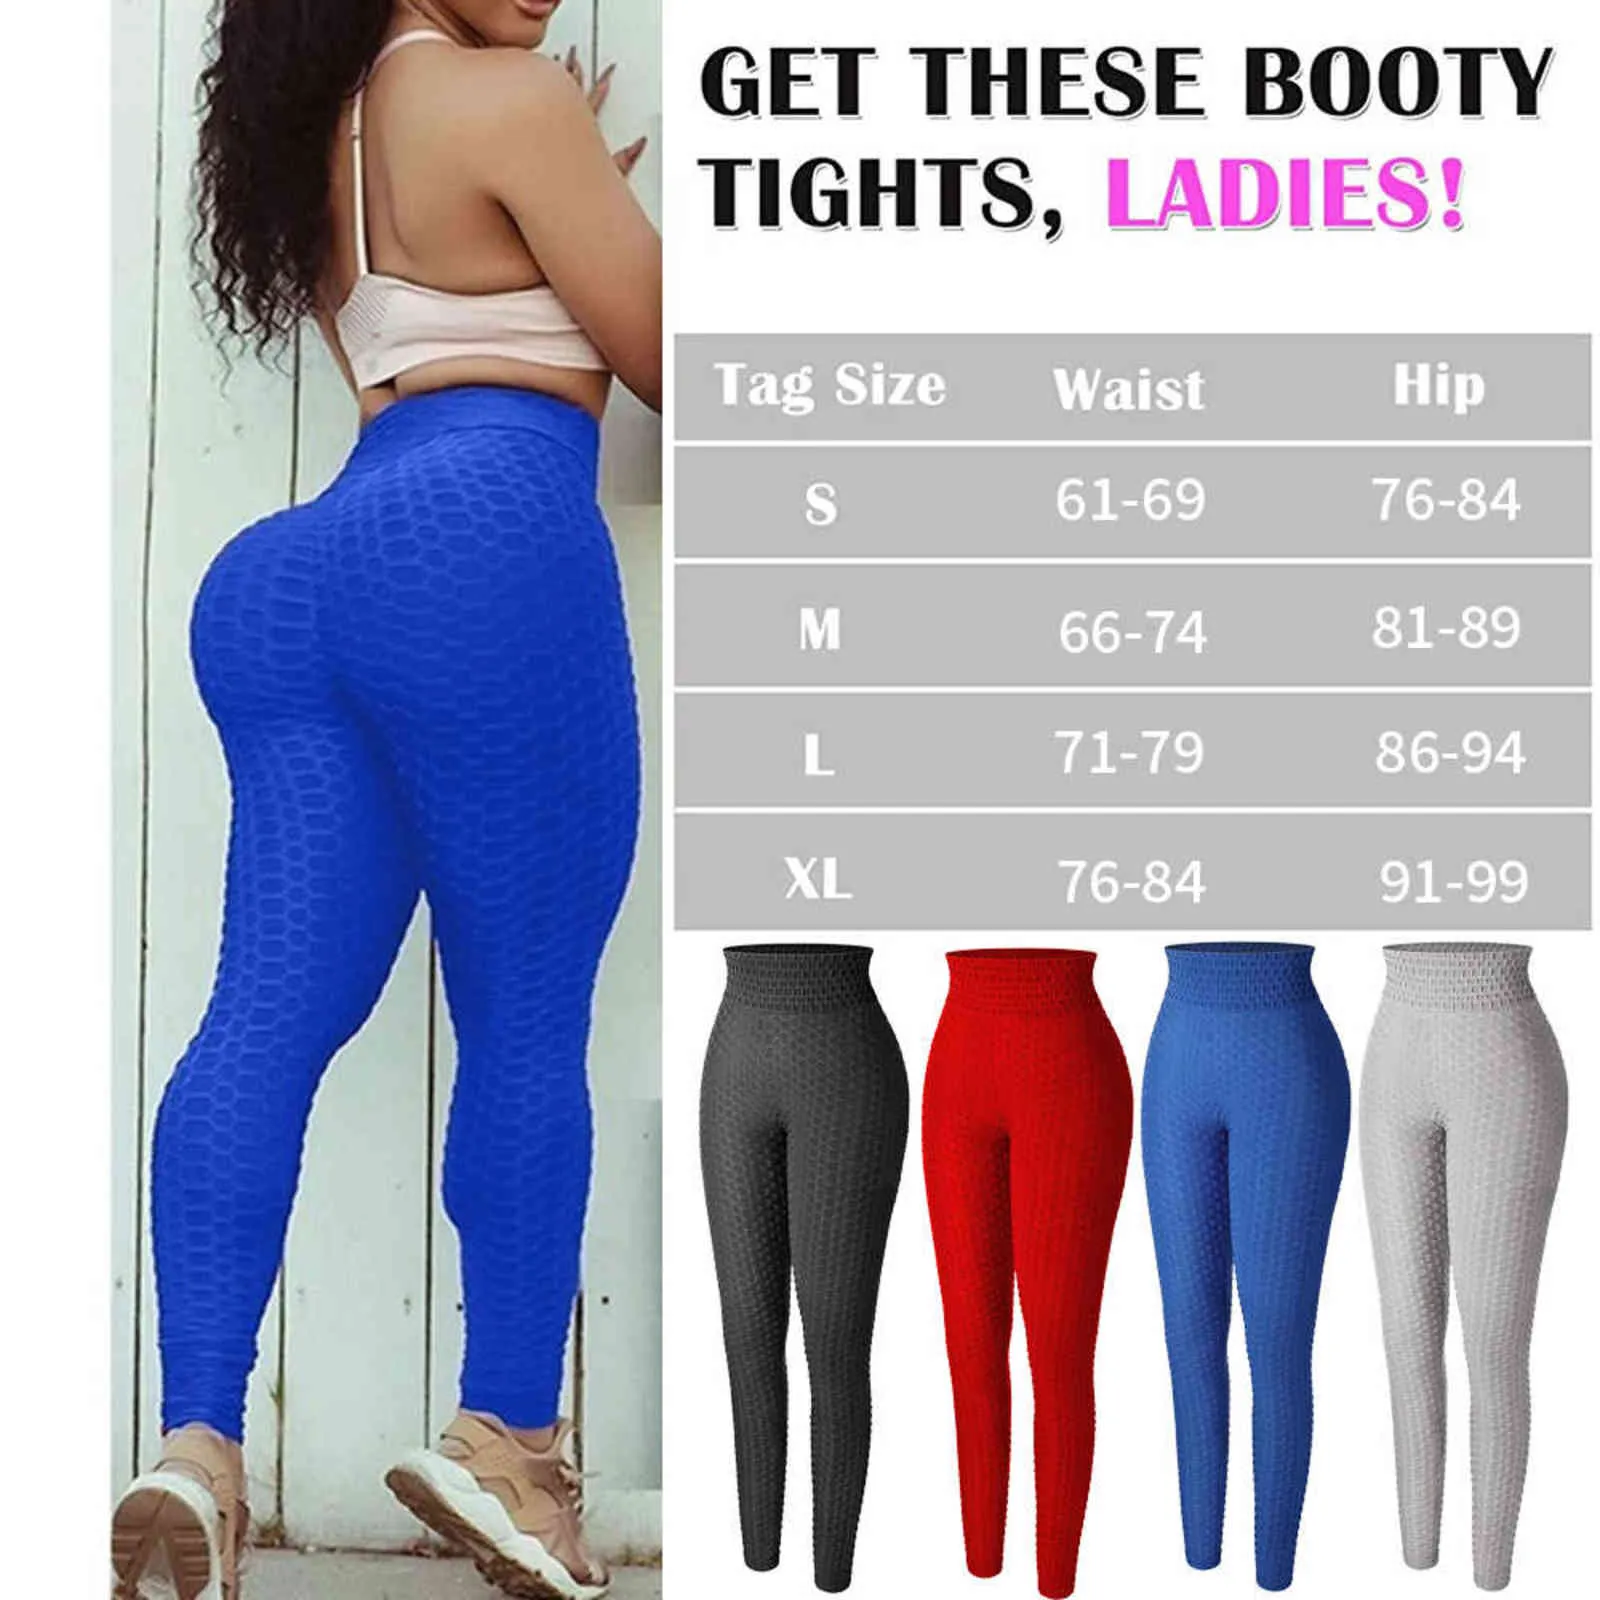 Fartey Women's Butt Lifting Workout Leggings Soft Elastic High Waist Yoga Pants Slim Fitted Tummy Control Butt Gym Booty Tights for Women, Size: 2XL